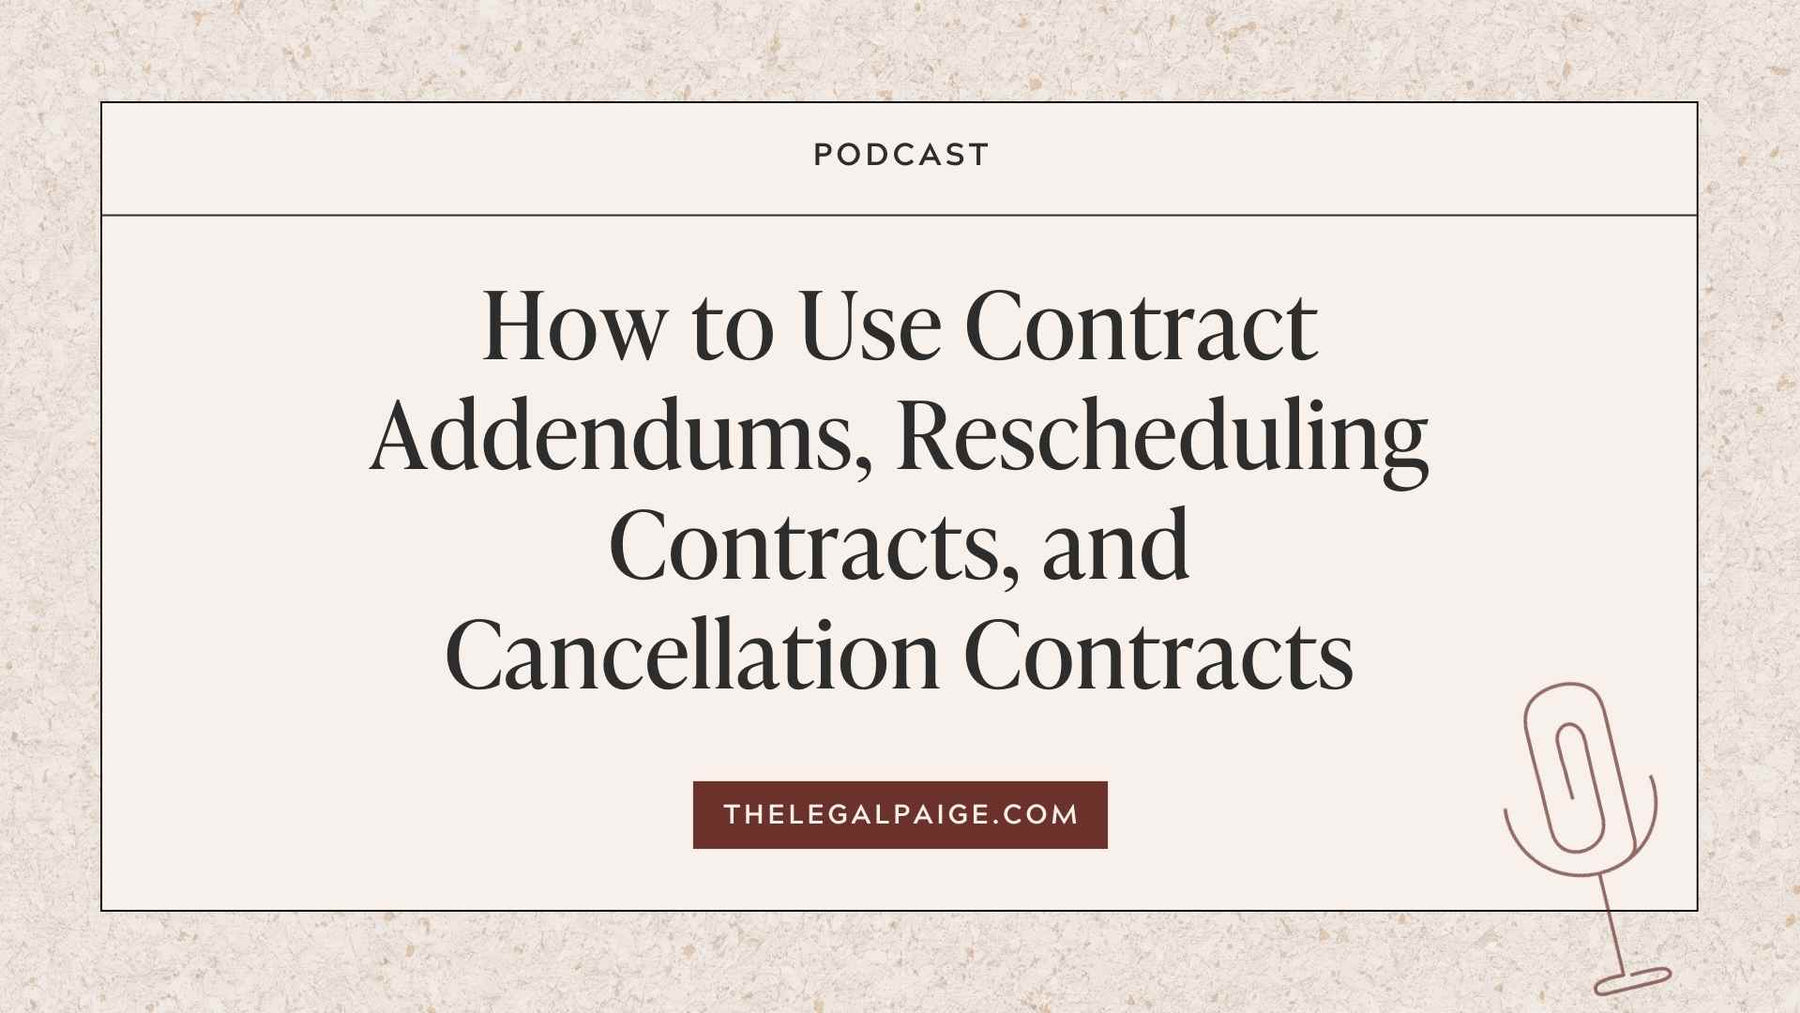 Episode 57:  How to Use Contract Addendums, Rescheduling Contracts, and Cancellation Contracts